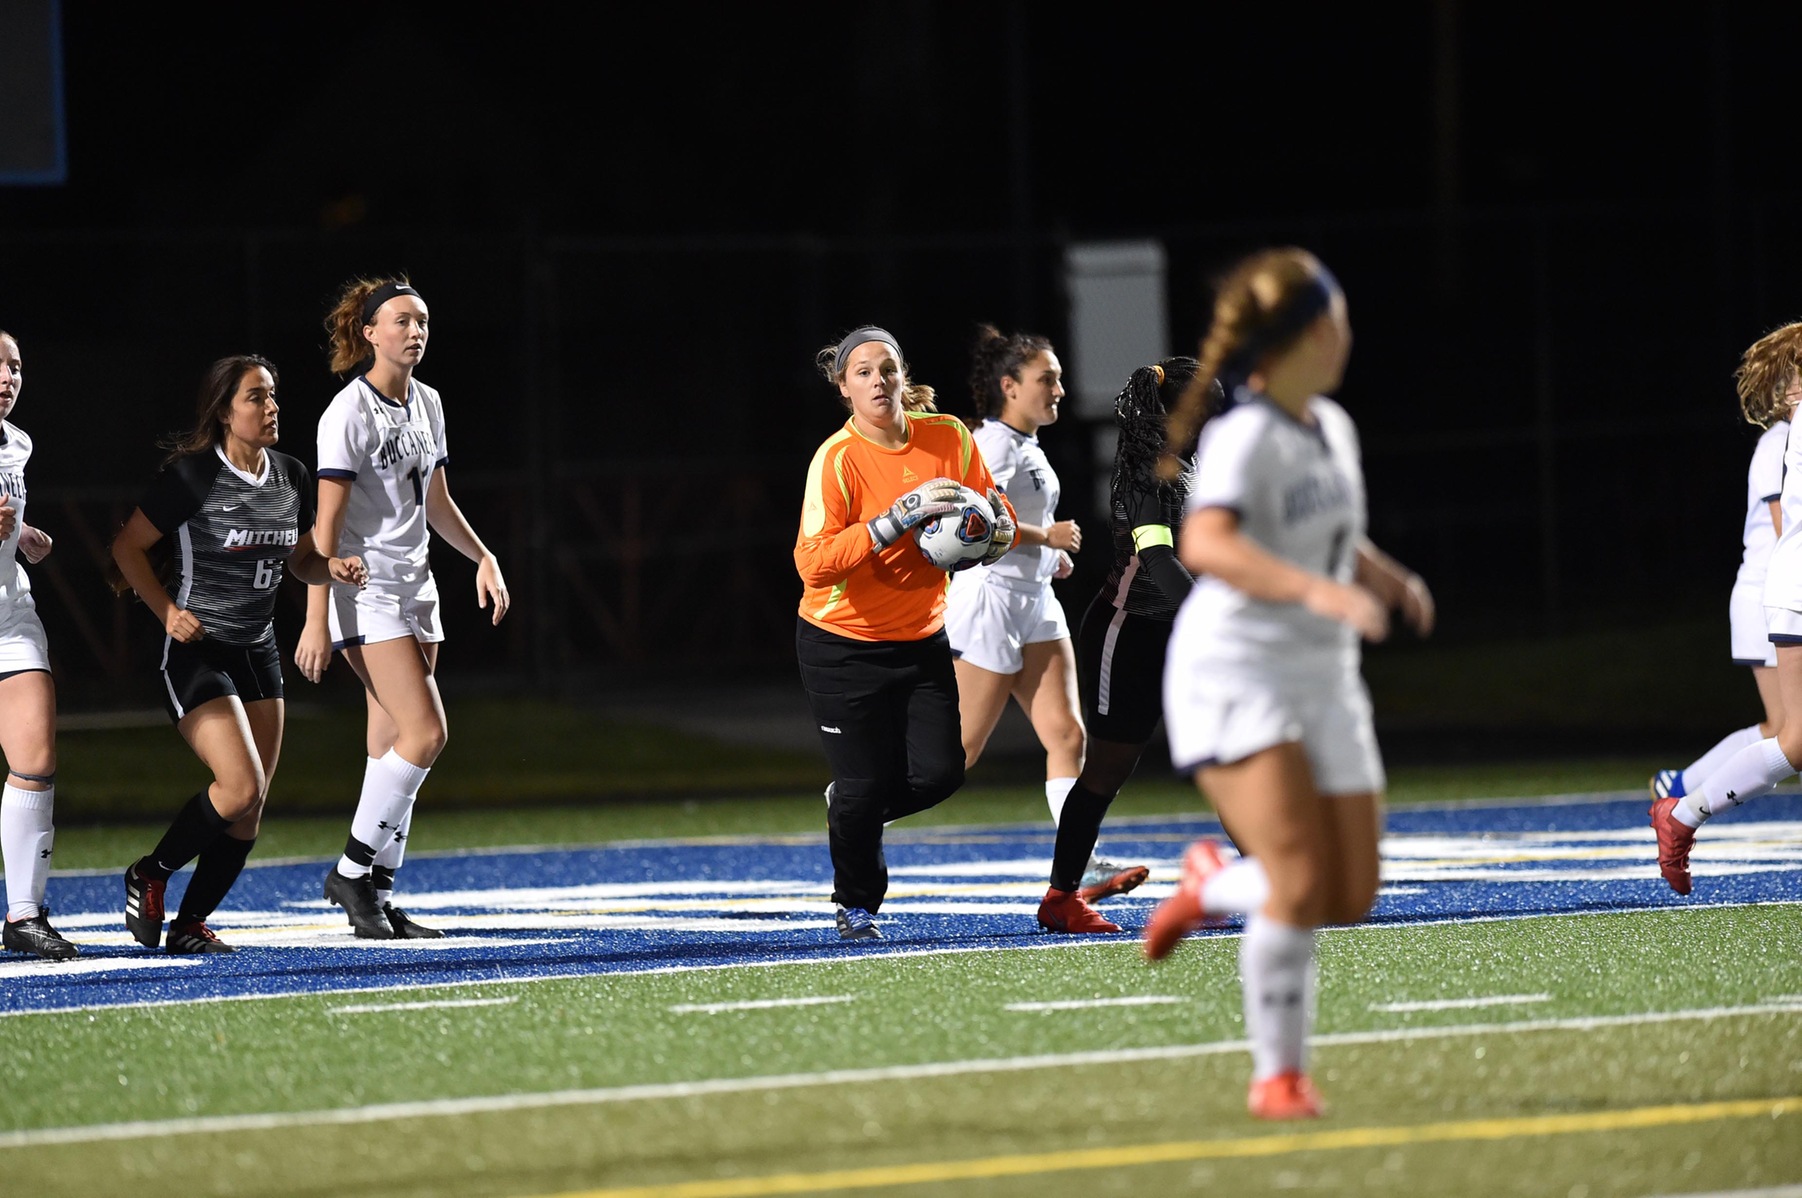 Women’s Soccer Drops Close One at Home to Hawks